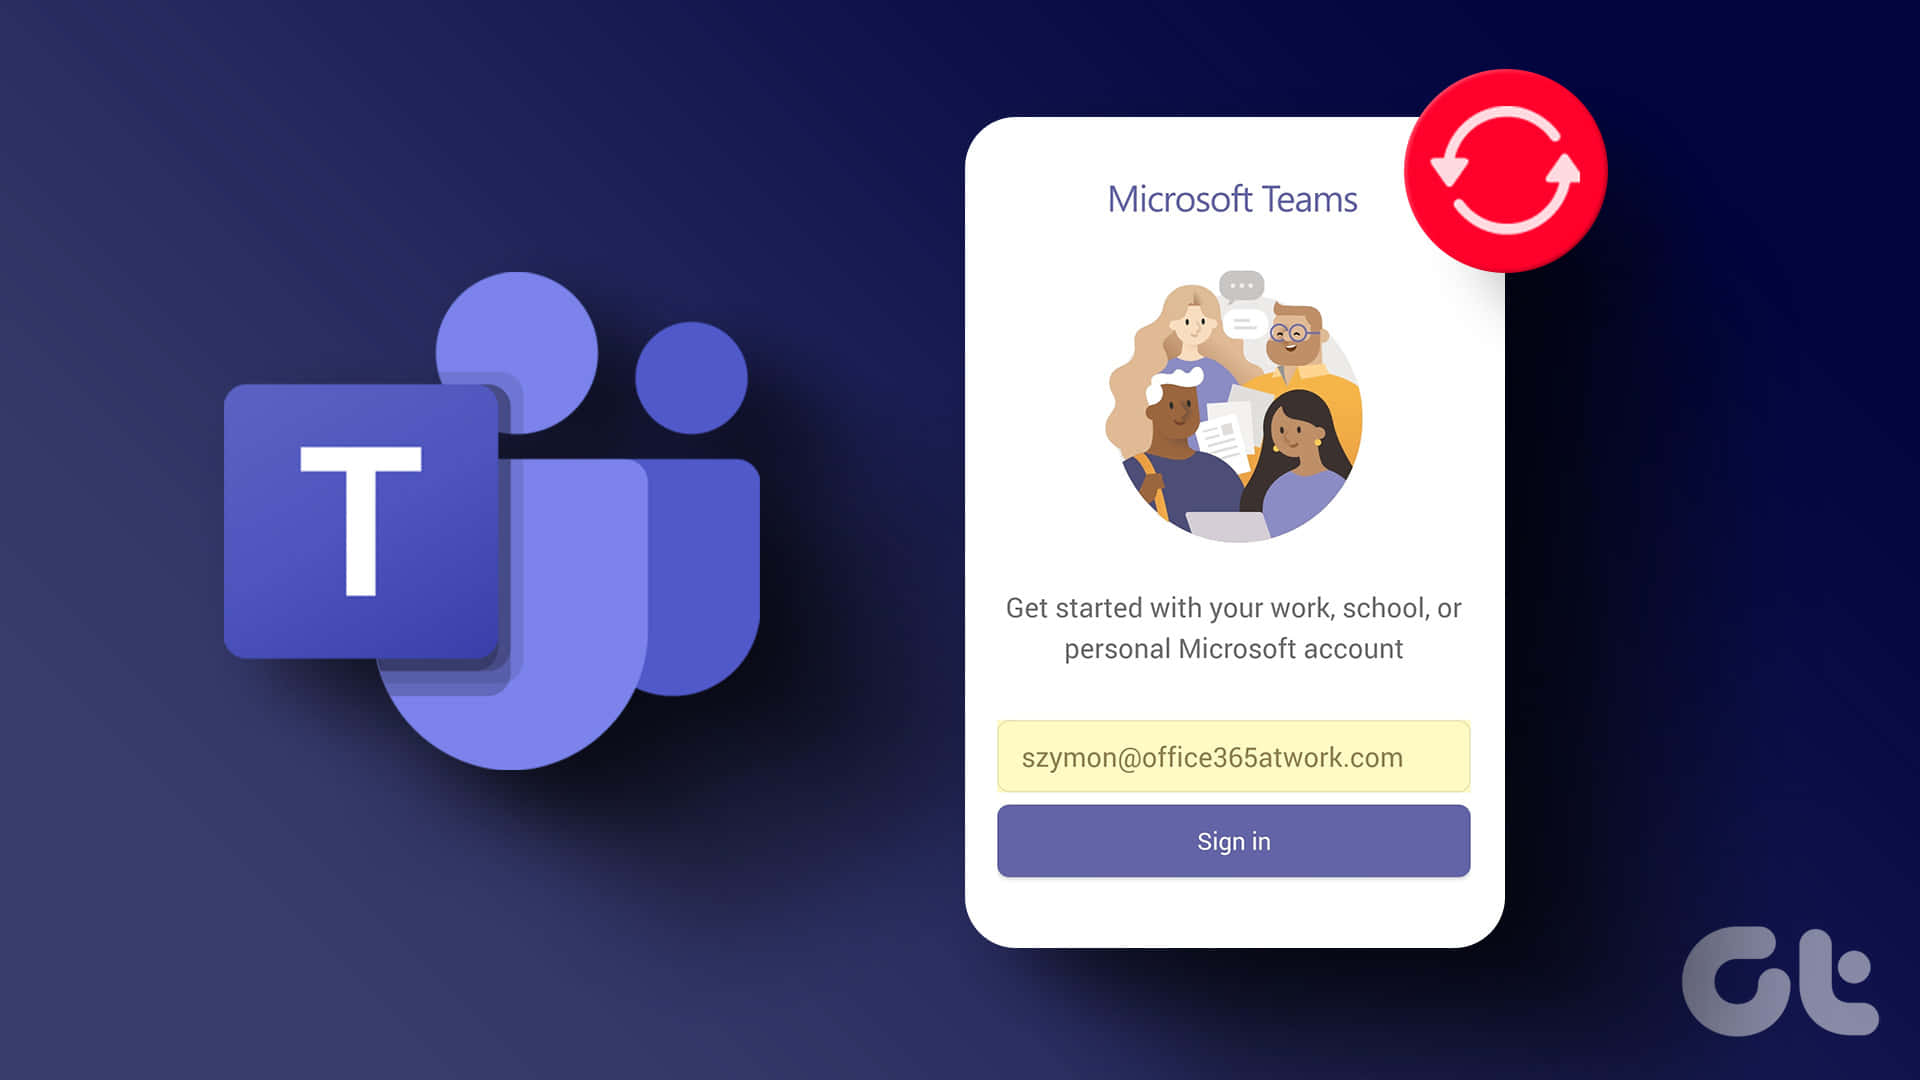 Keeping Connected with Microsoft Teams